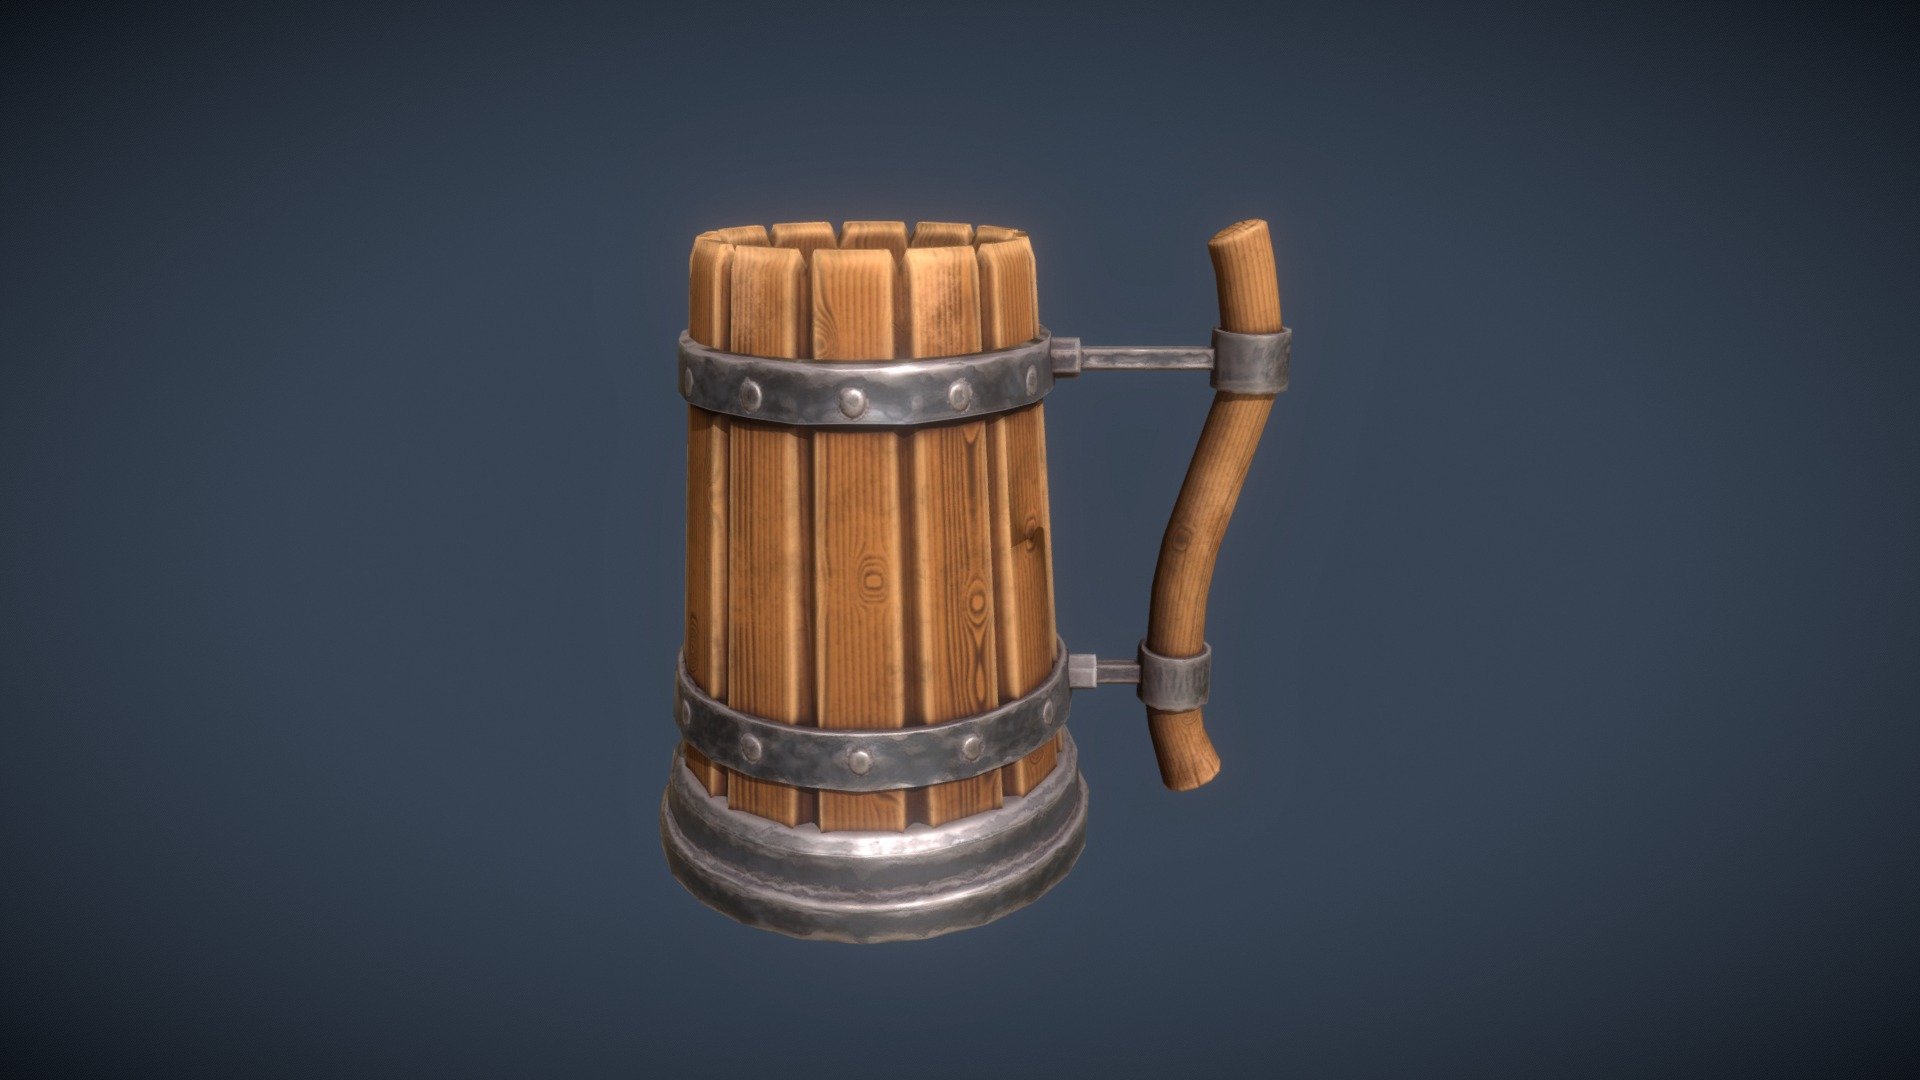 Low poly stylized medieval / viking mug PRB Game ready.




File format: .fbx

768 vertices / 711 faces

2K Textures: 2048x2048 with Basecolor / Height / Metallic / Roughness / Normal (opengl and directx) / Ambiant occlusion

PRB (metallic roughness), Unity URP (metallic standard), Unreal 4 (packed) textures

If You want different texture export settings - write to me, I will be happy to help! Hope you'll like it! - Low poly stylized Mug - Buy Royalty Free 3D model by zivjeli 3d model